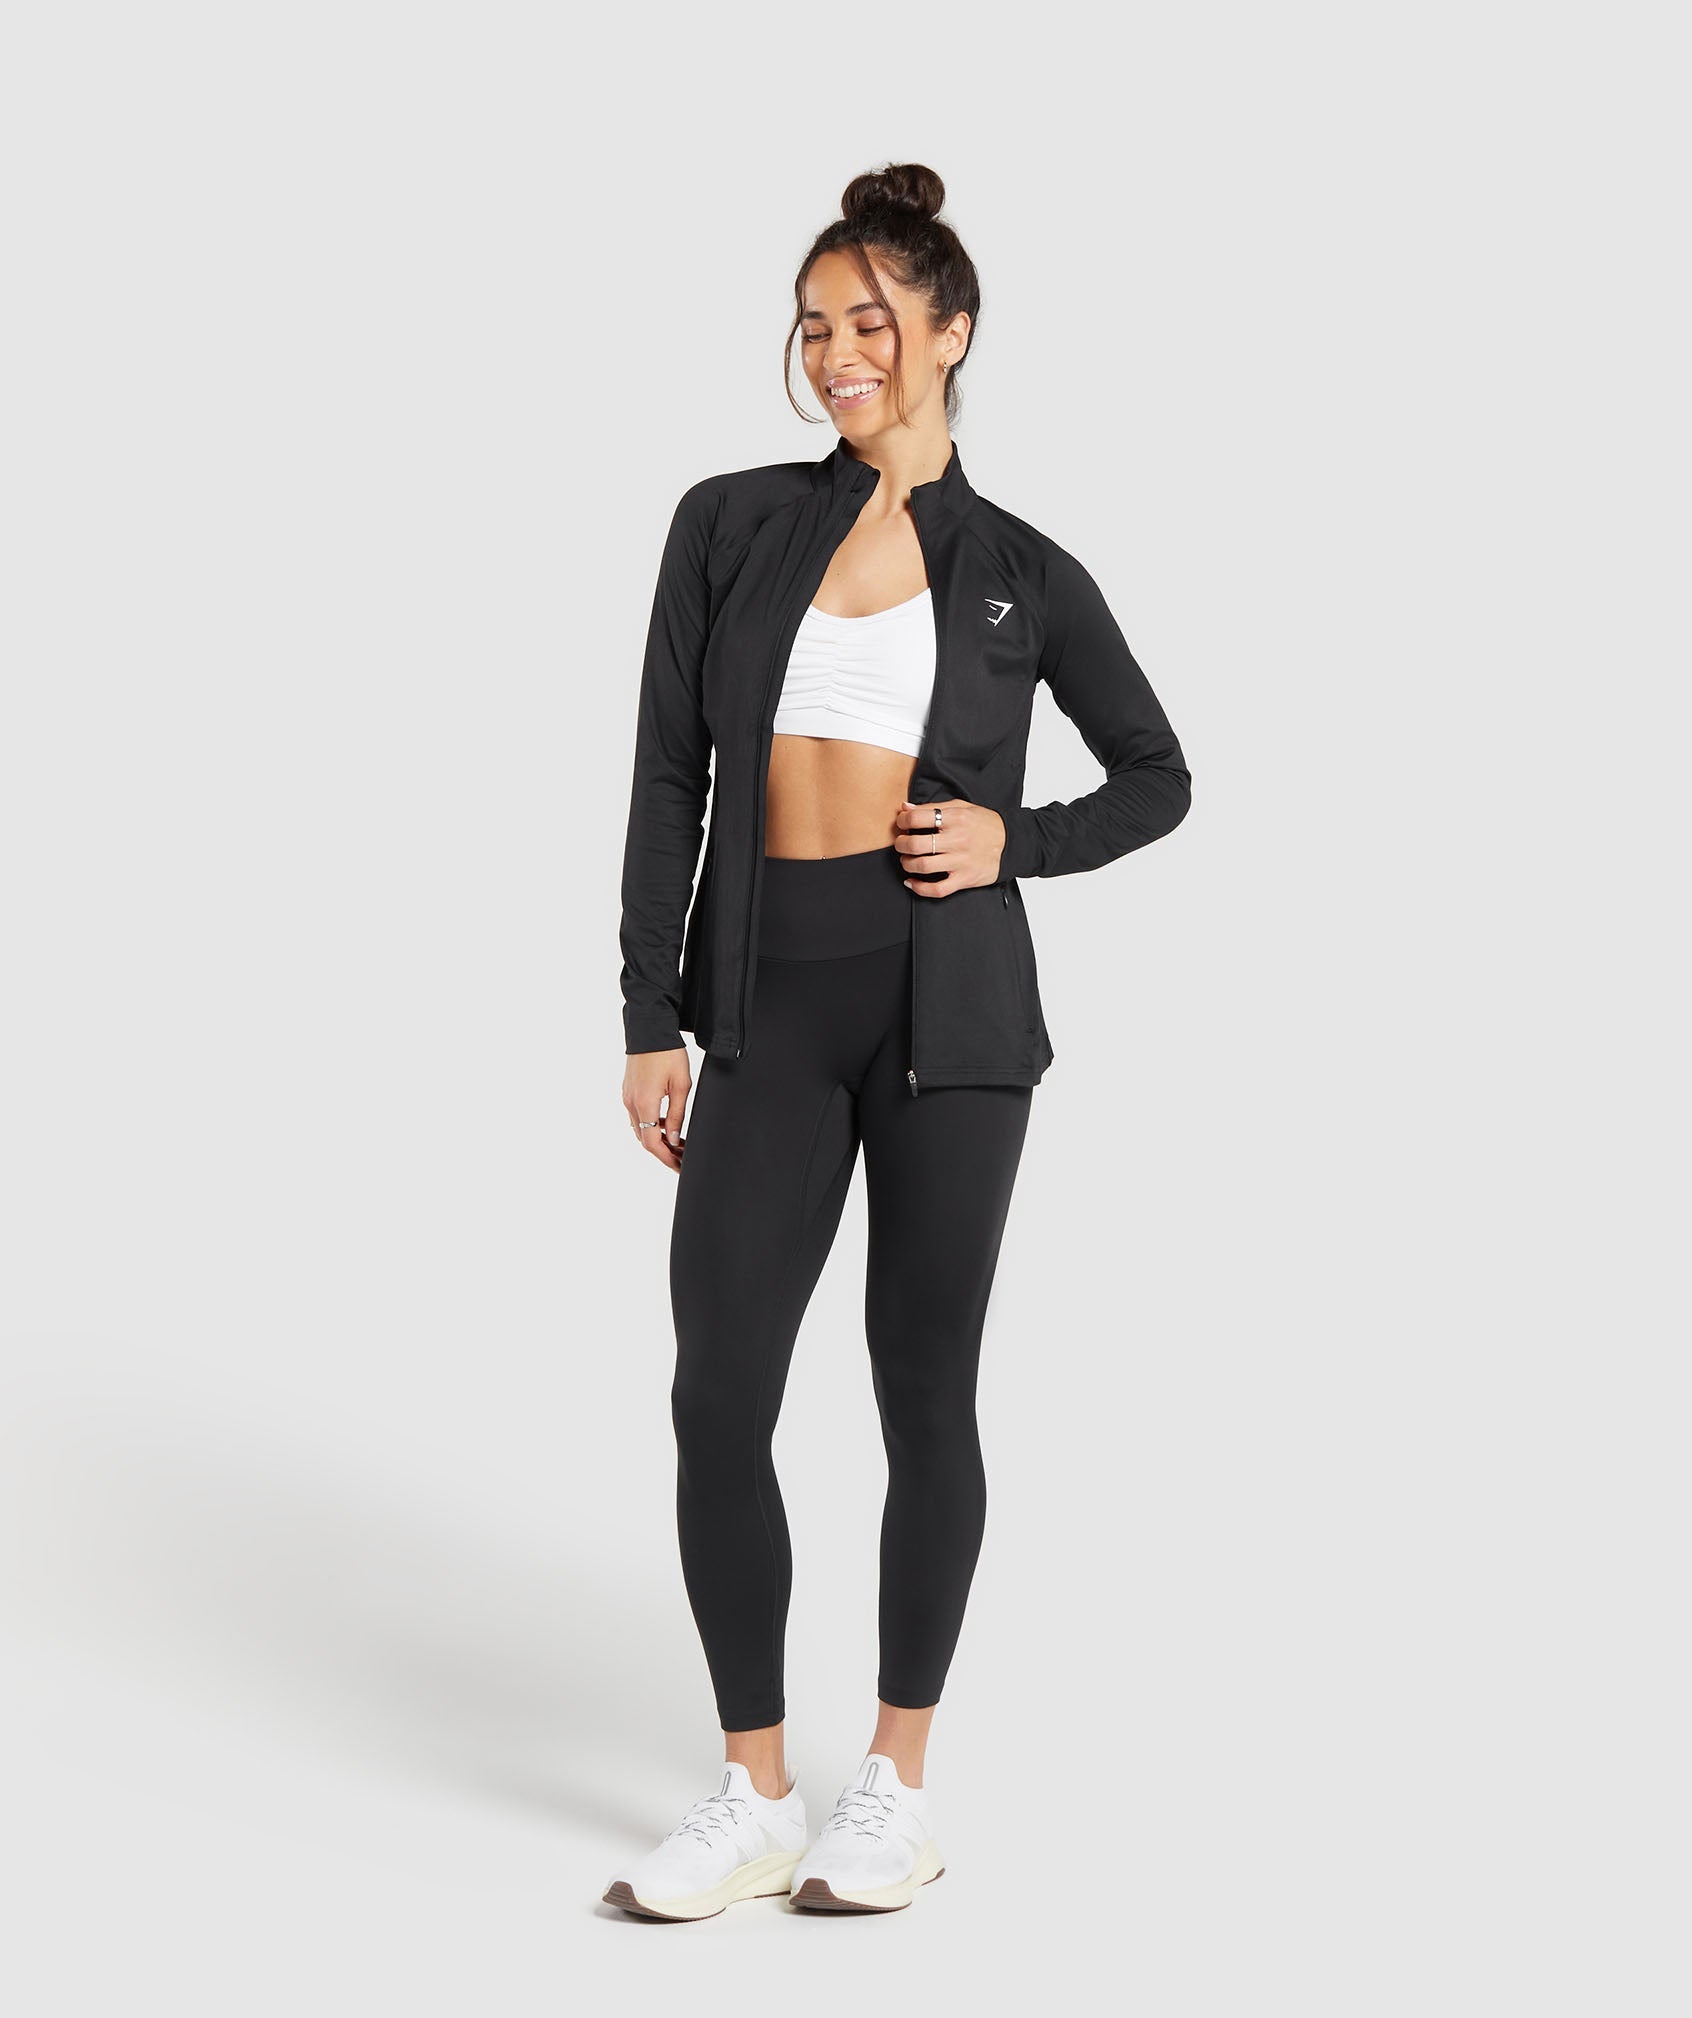 Training Jacket in Black - view 4